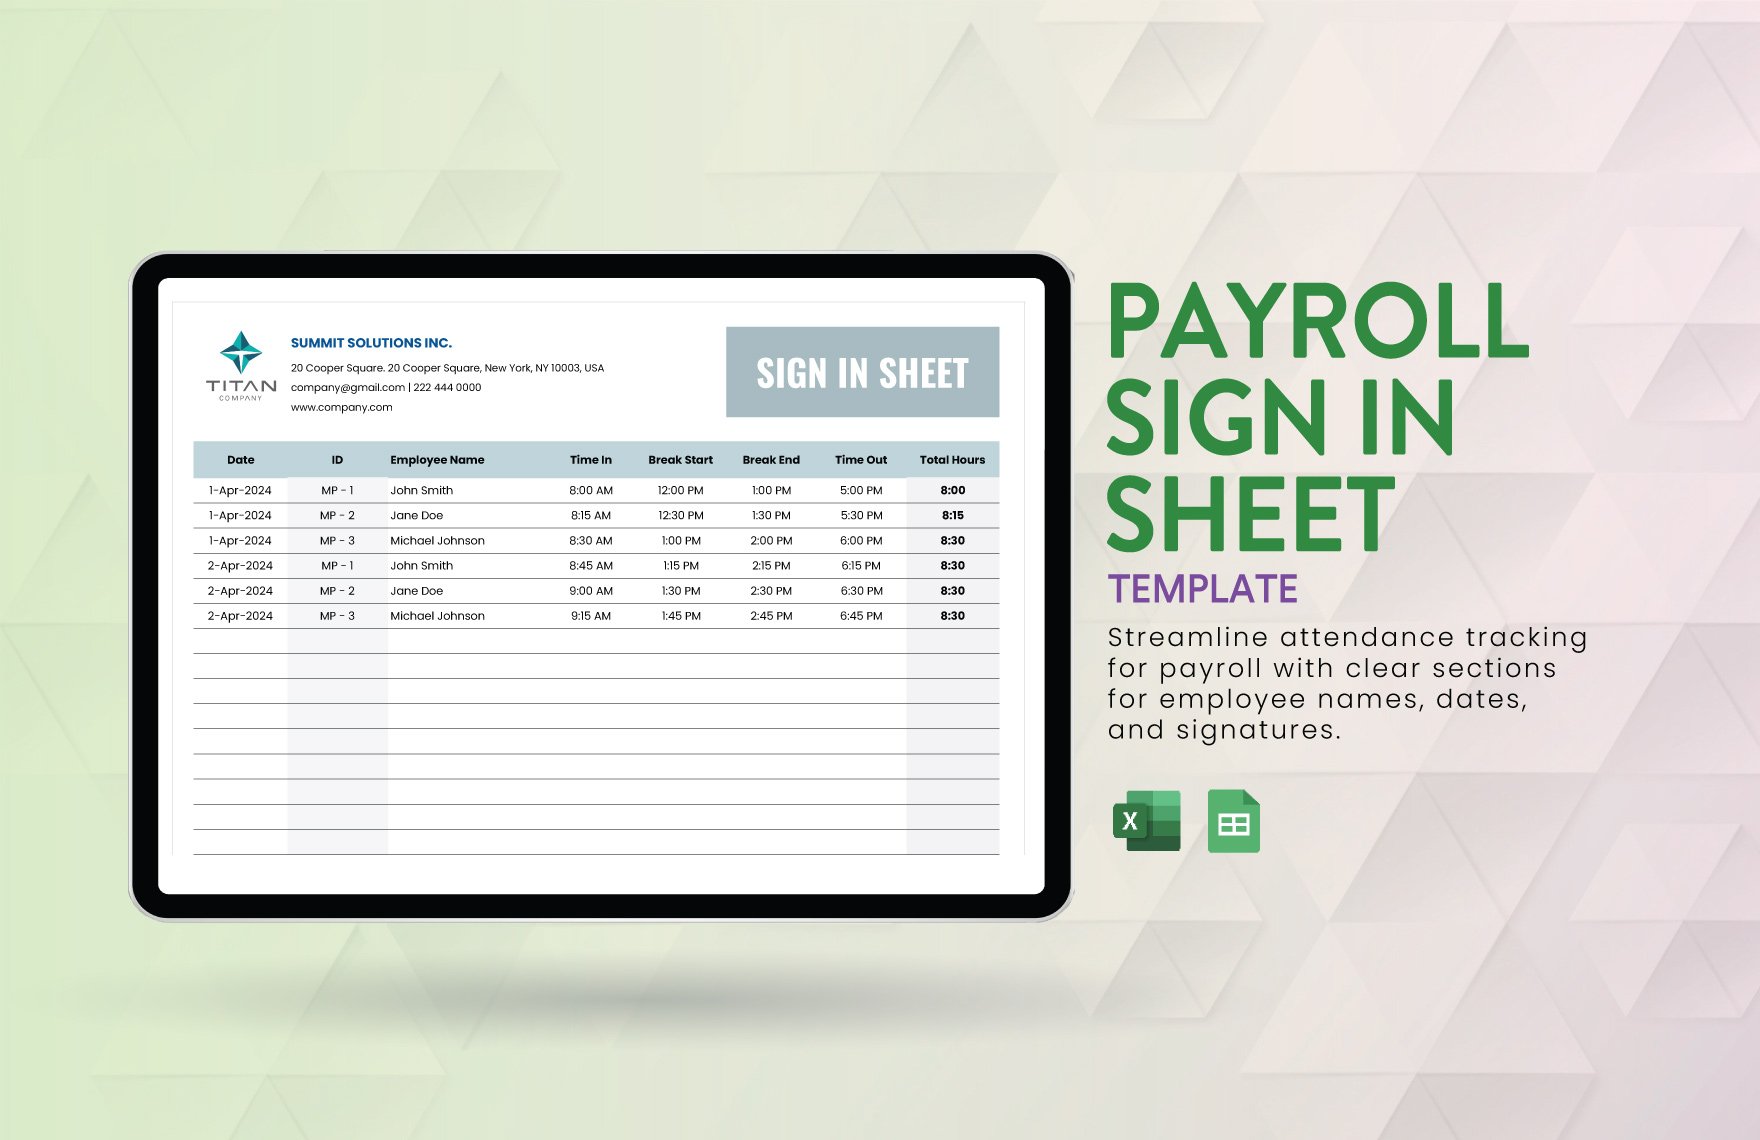 Payroll Sign in Sheet Template